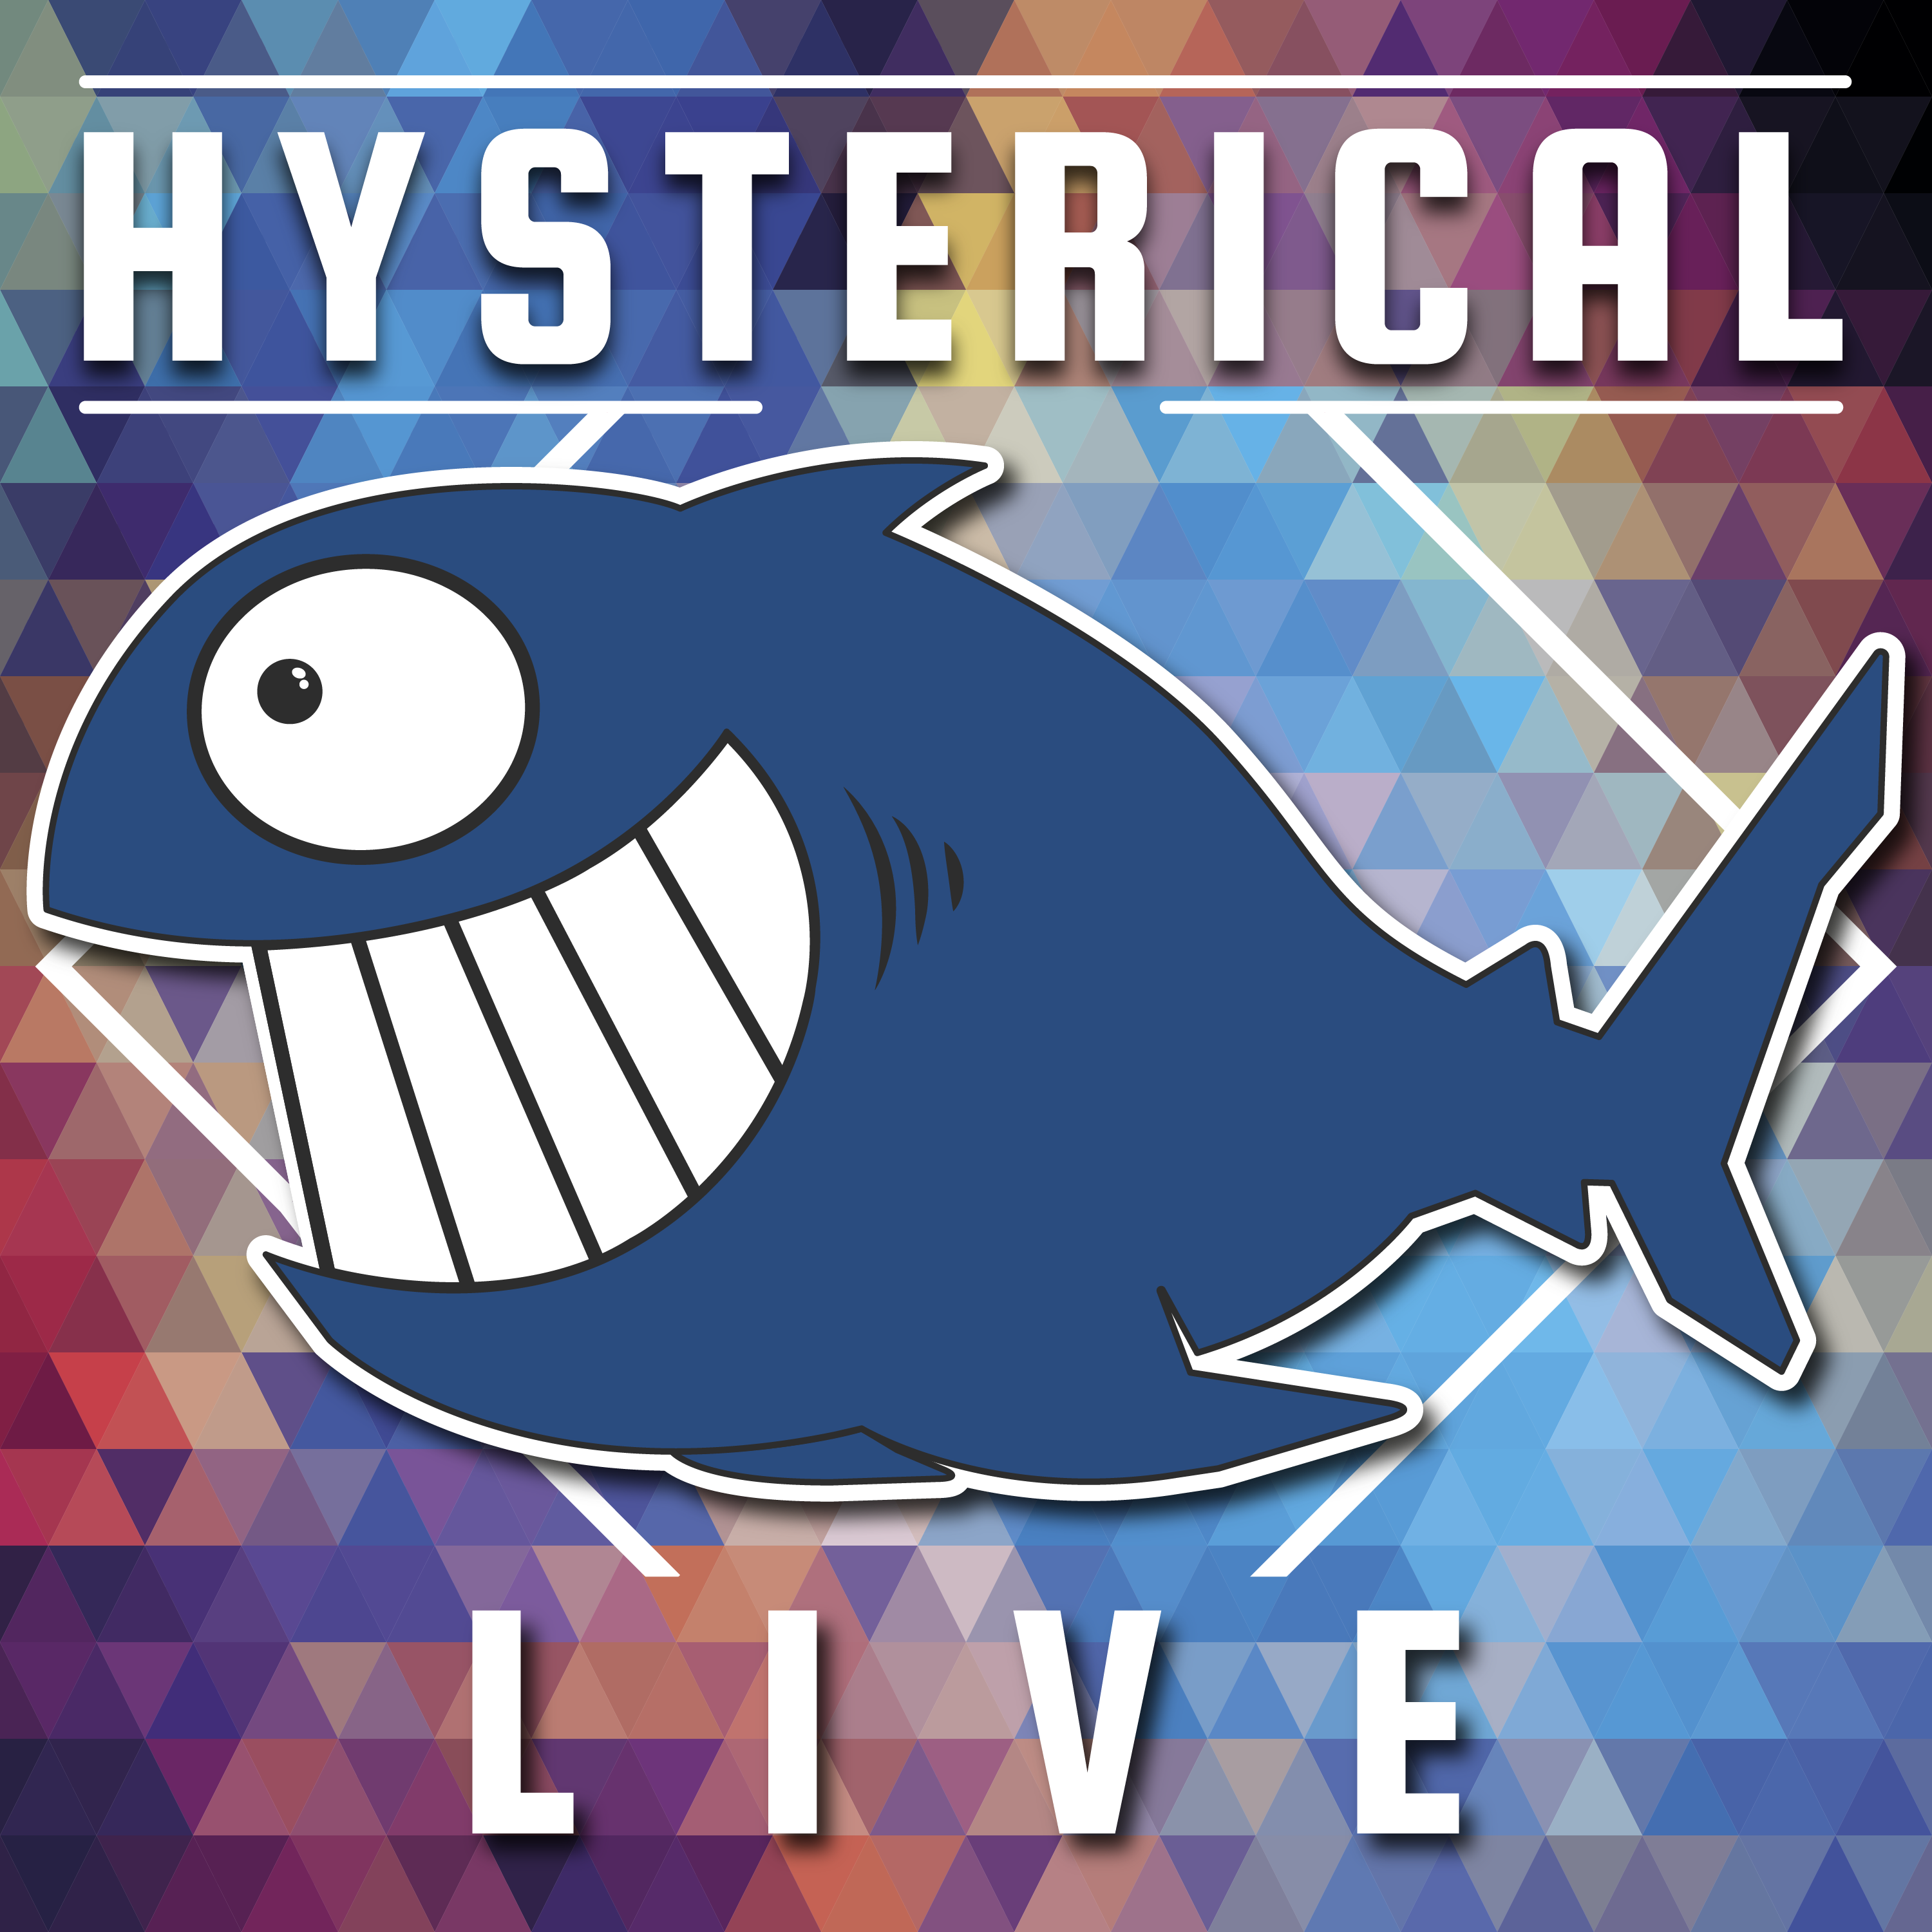 Hysterical Live